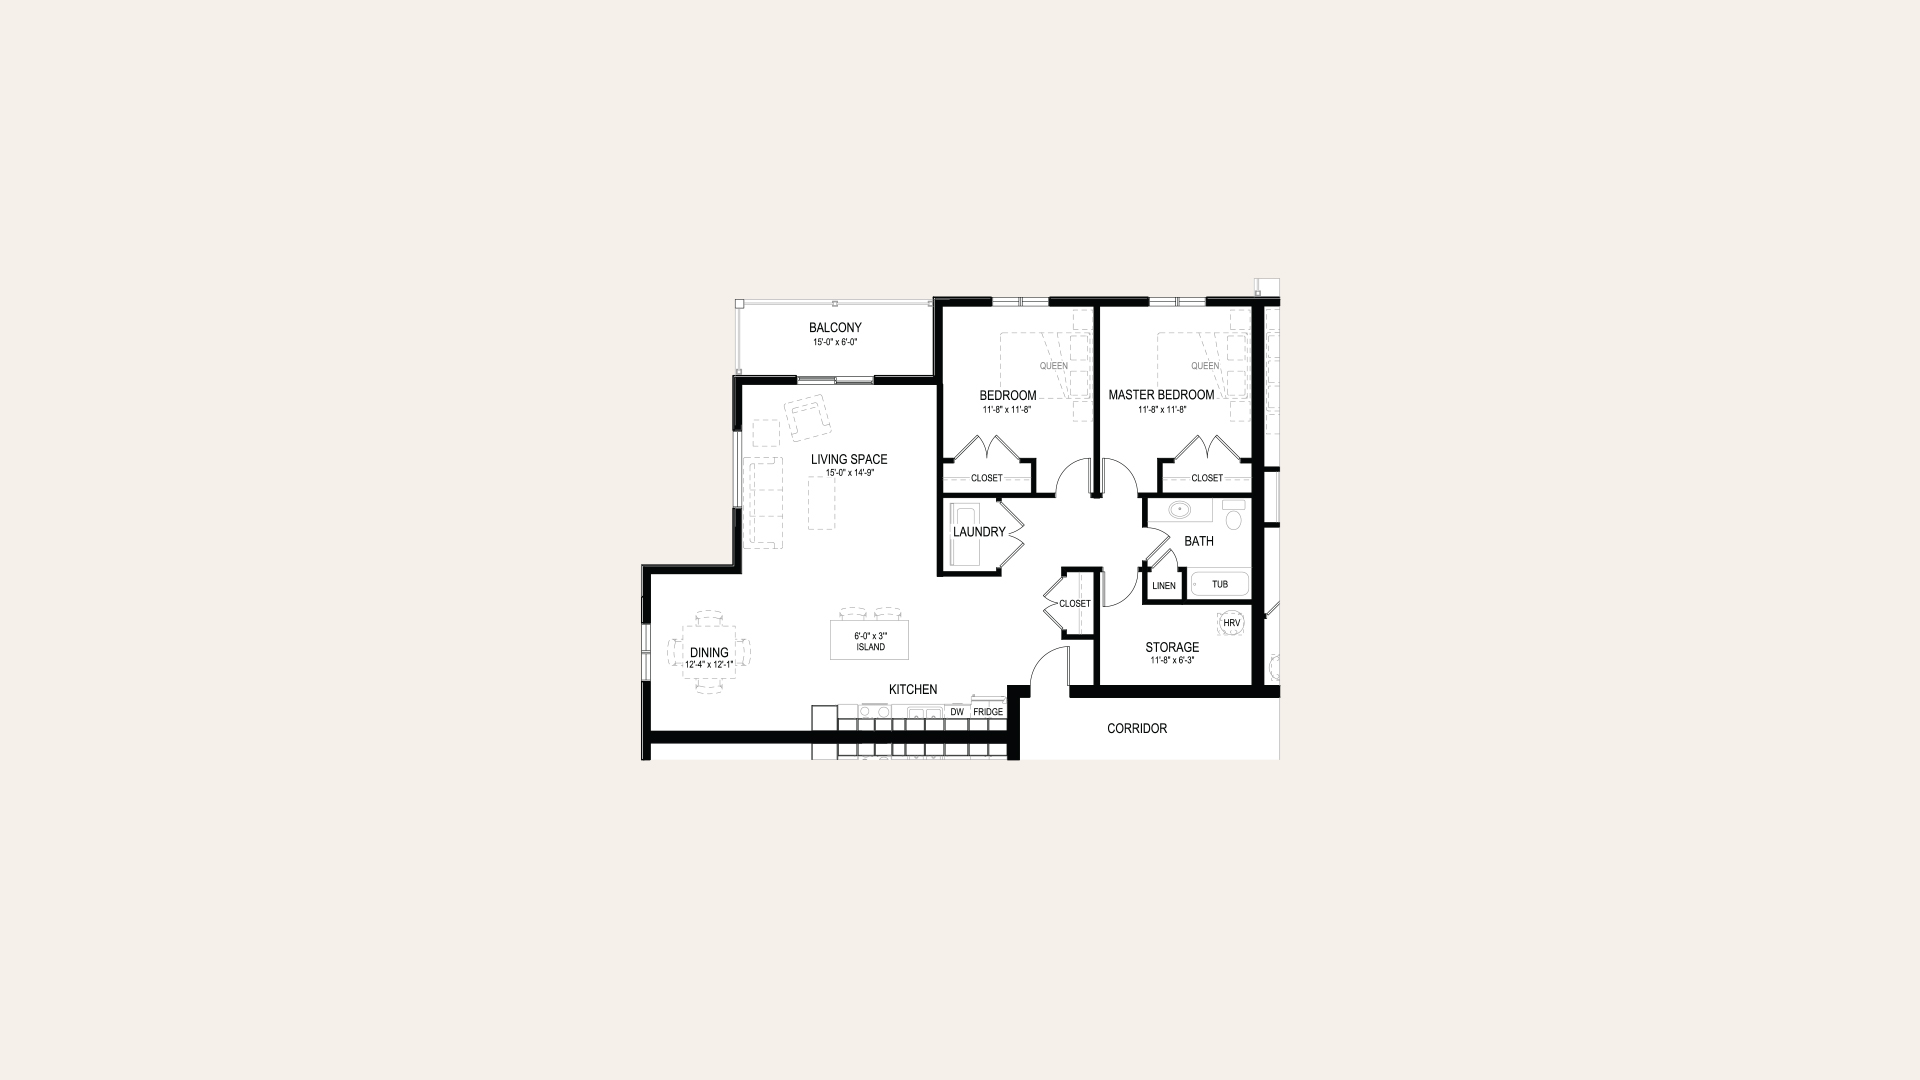 Floor plan of apartment A in Building C. Two bedrooms, one bathroom, storage room, laundry closet, balcony, and an open concept kitchen and living room.